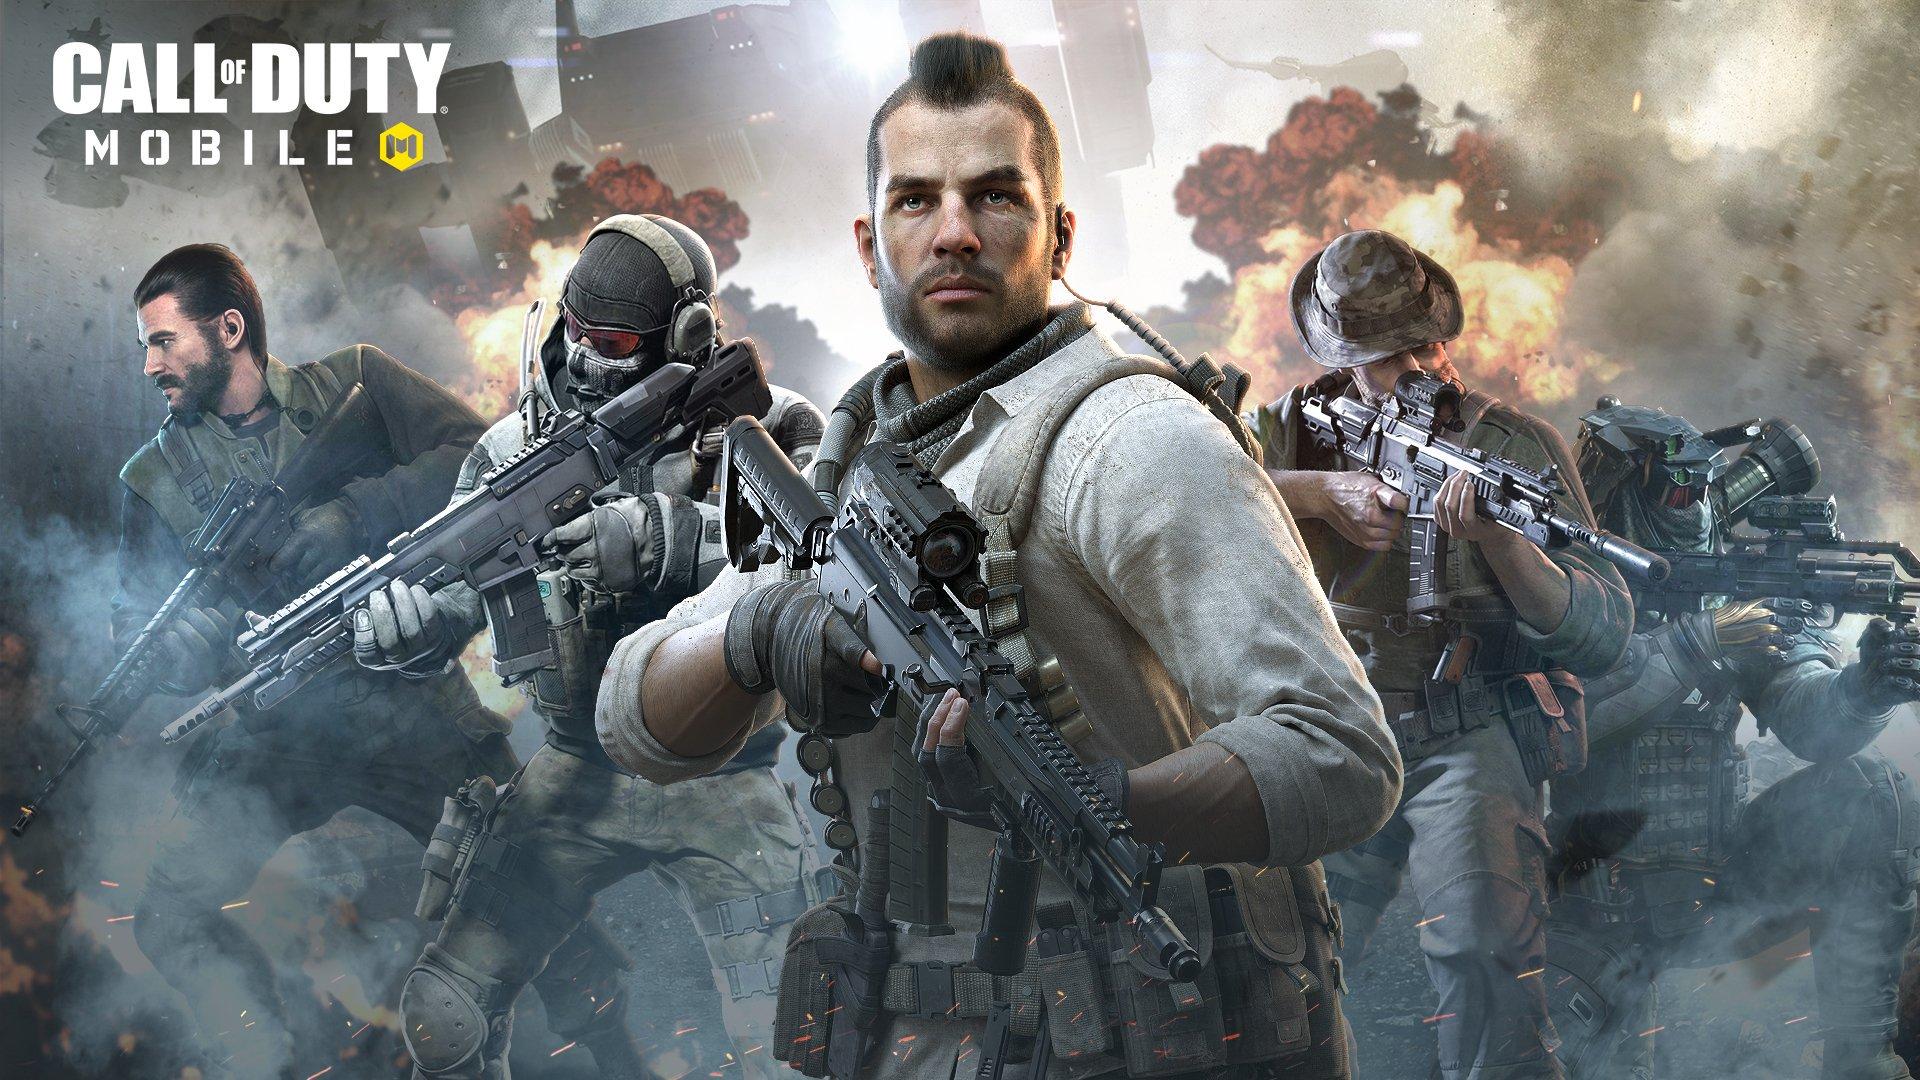 Call of Duty: Mobile launches worldwide October 1